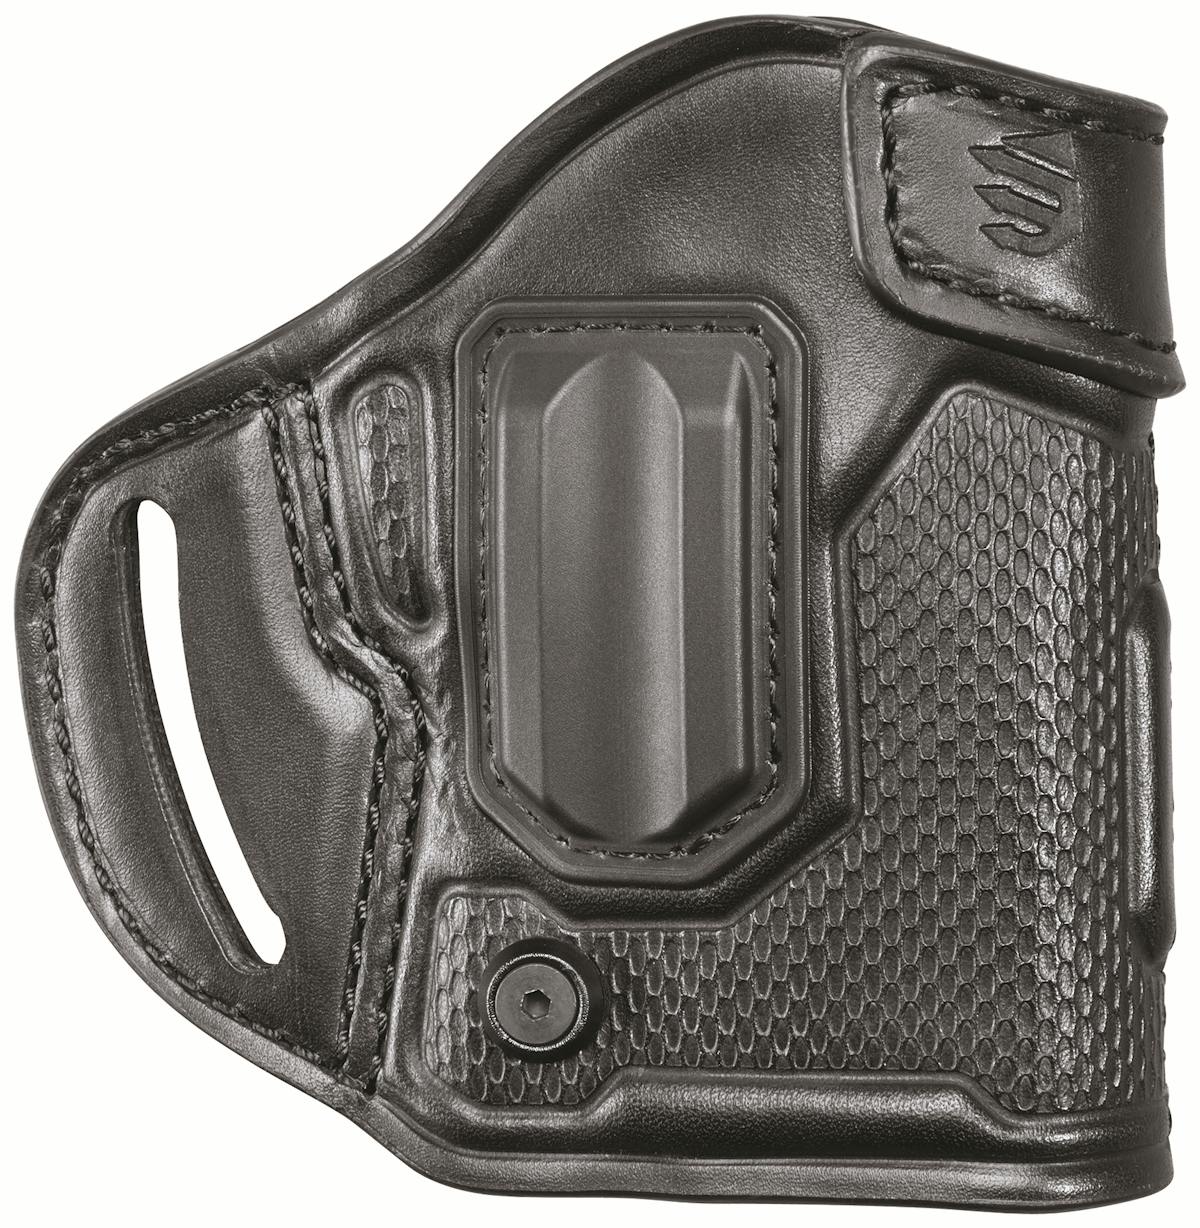 BLACKHAWK launched a new line of leather holsters, the MBOSS, which incorporates a sewn on guide to help with safe trigger finger placement prior to the draw (on the belt models).